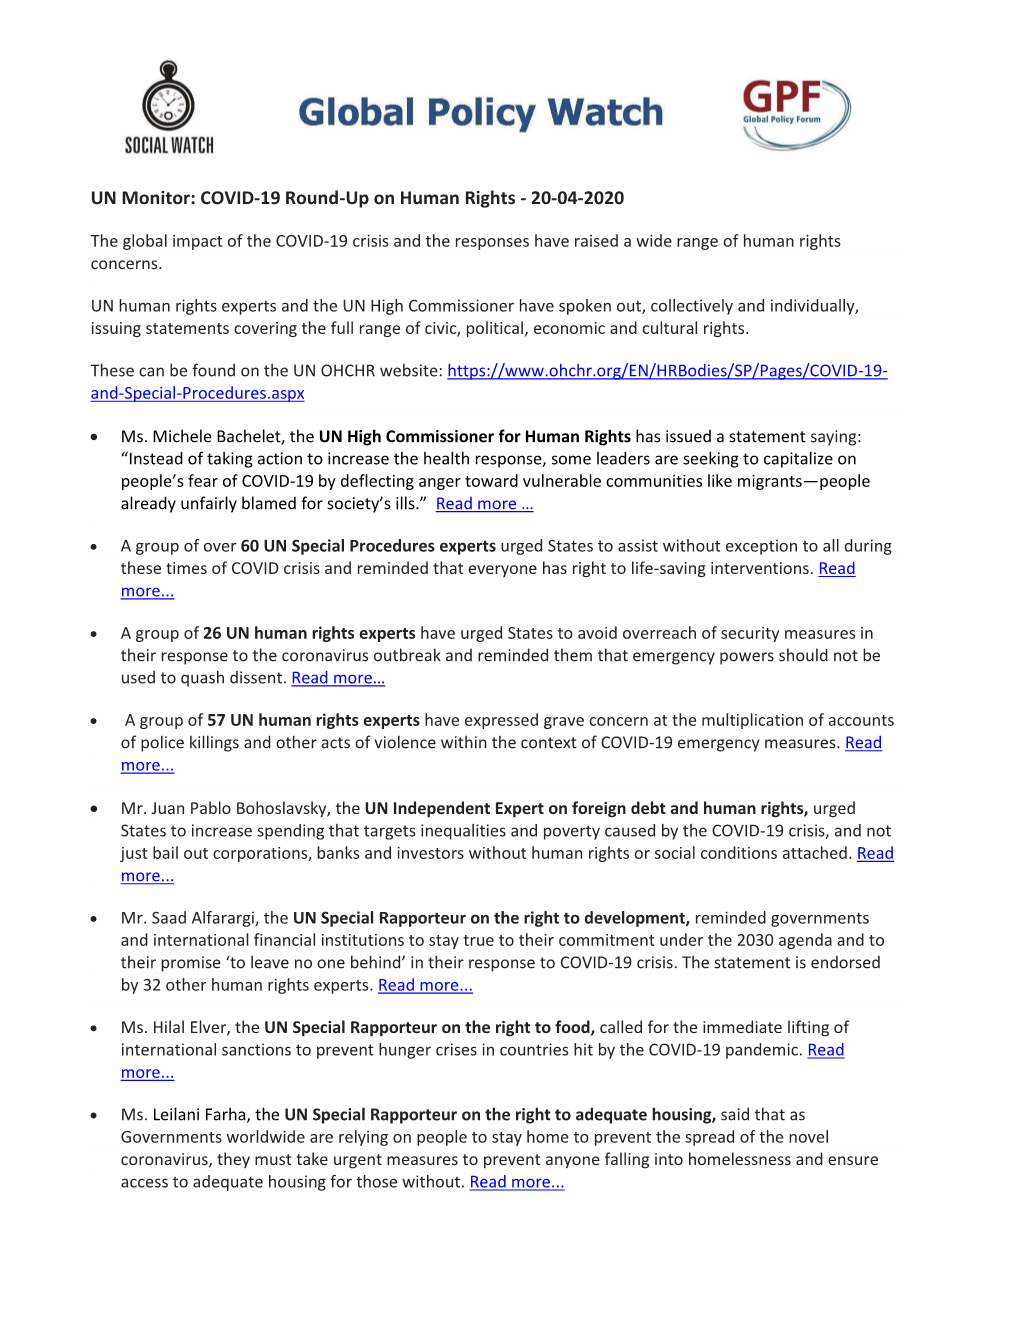 UN Monitor: COVID-19 Round-Up on Human Rights - 20-04-2020